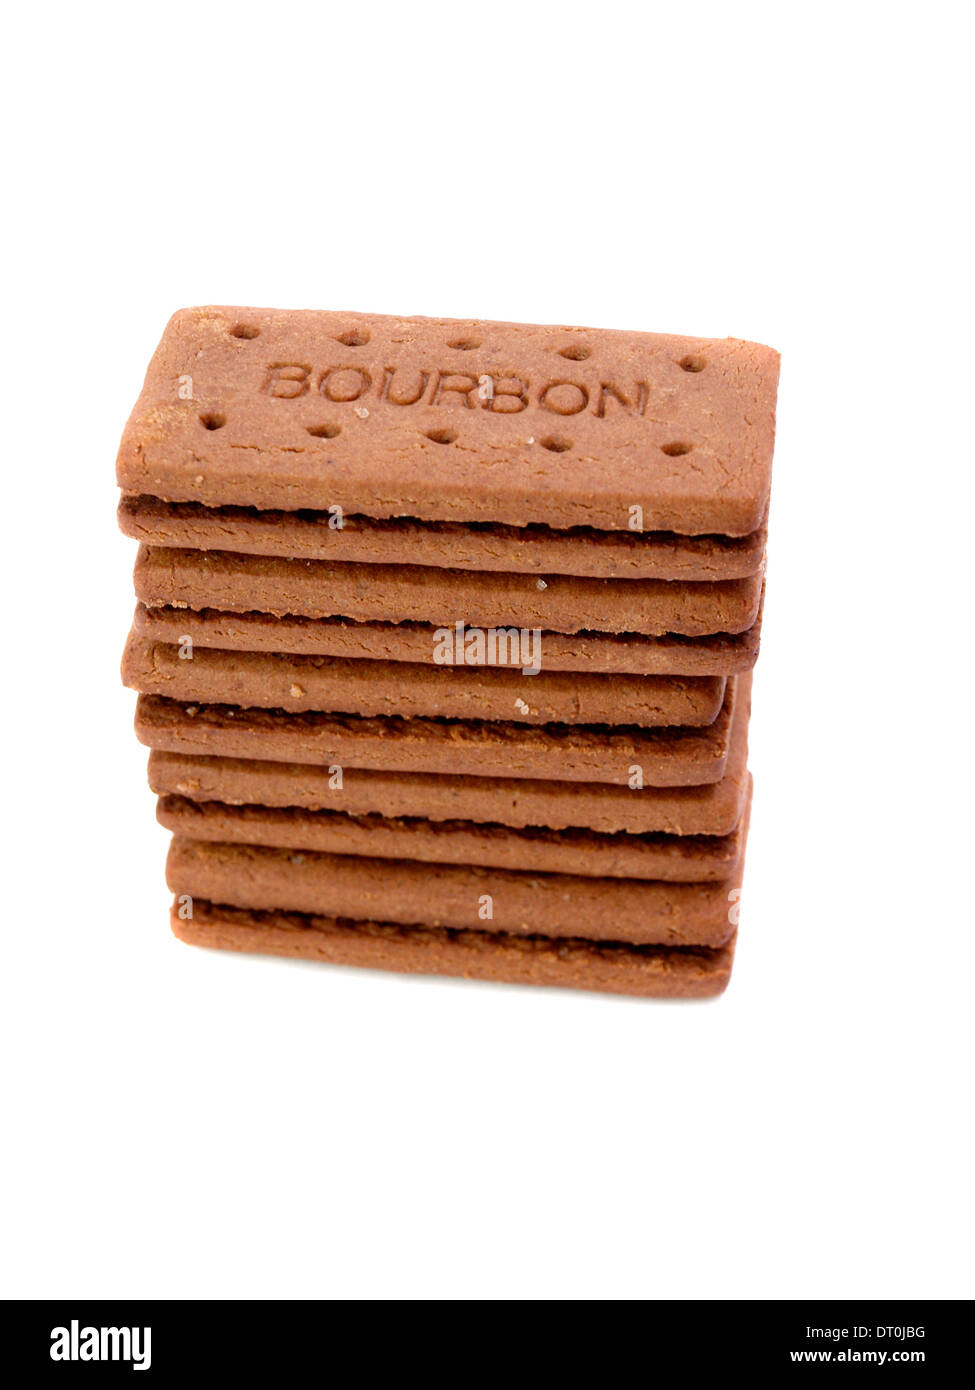 Stack of Bourbon biscuits Stock Photo